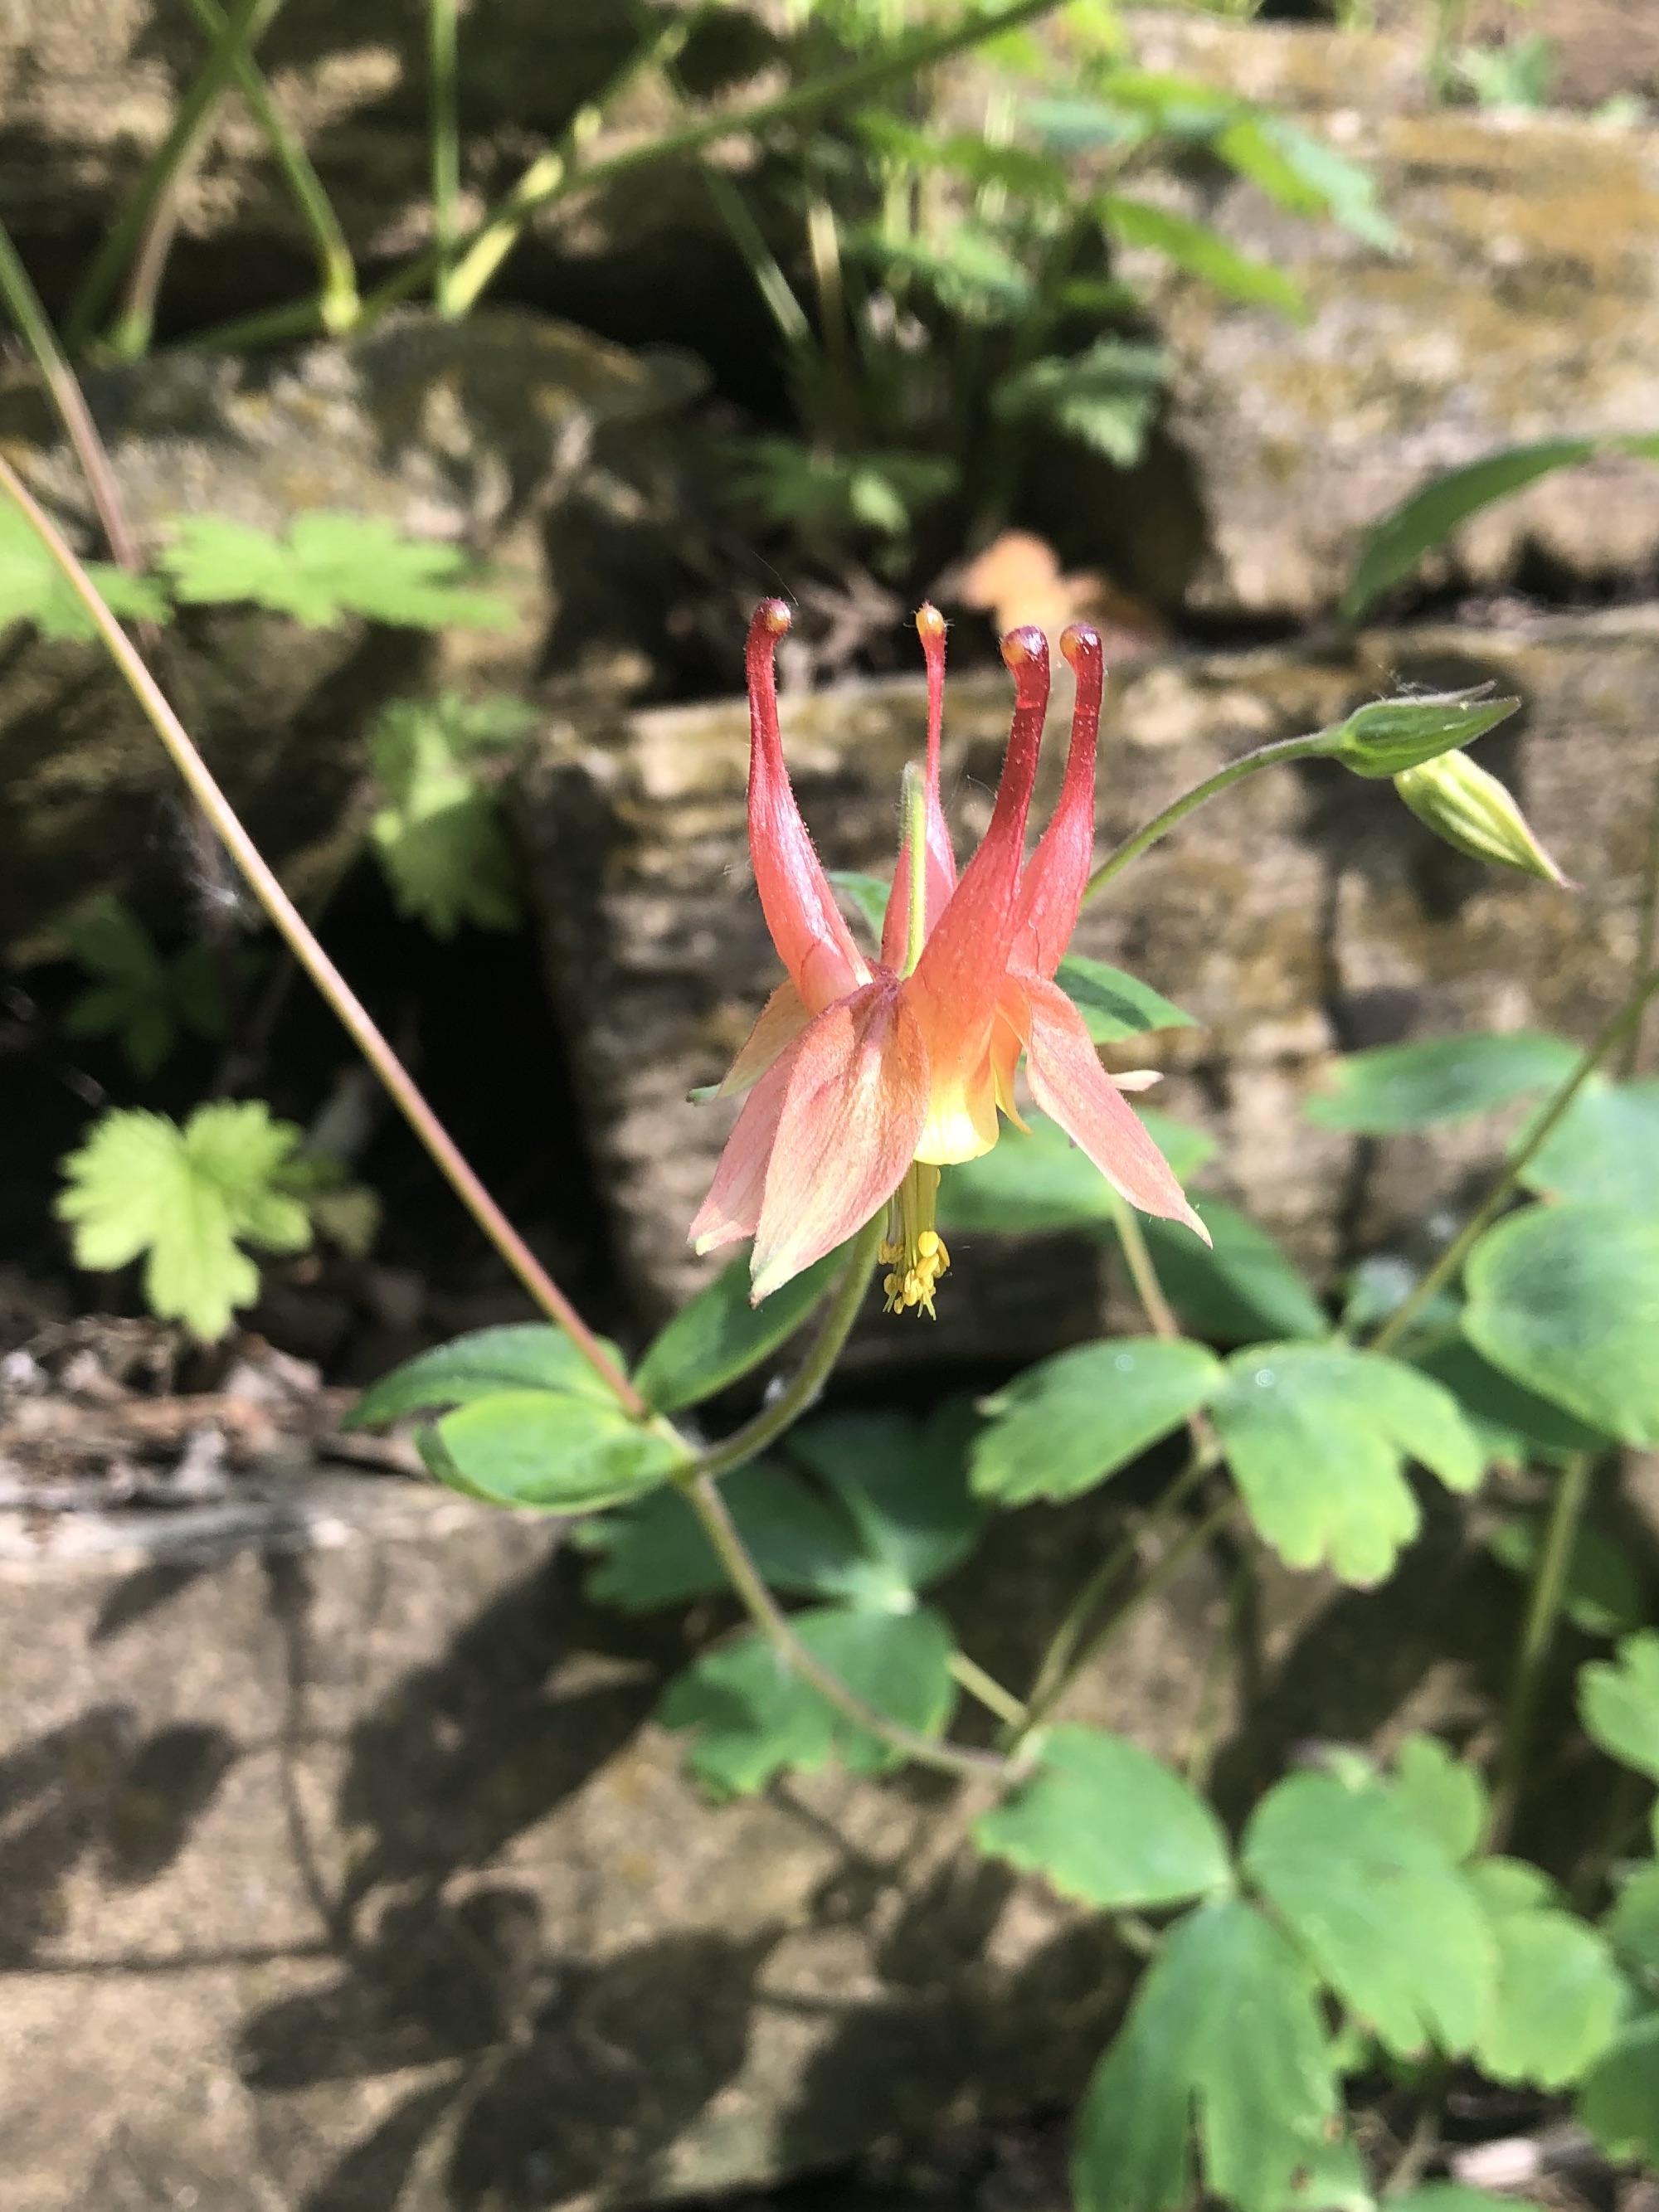 Wild Columbine along stone wall of Council Ring by Council Ring Springs on May 28, 2022.